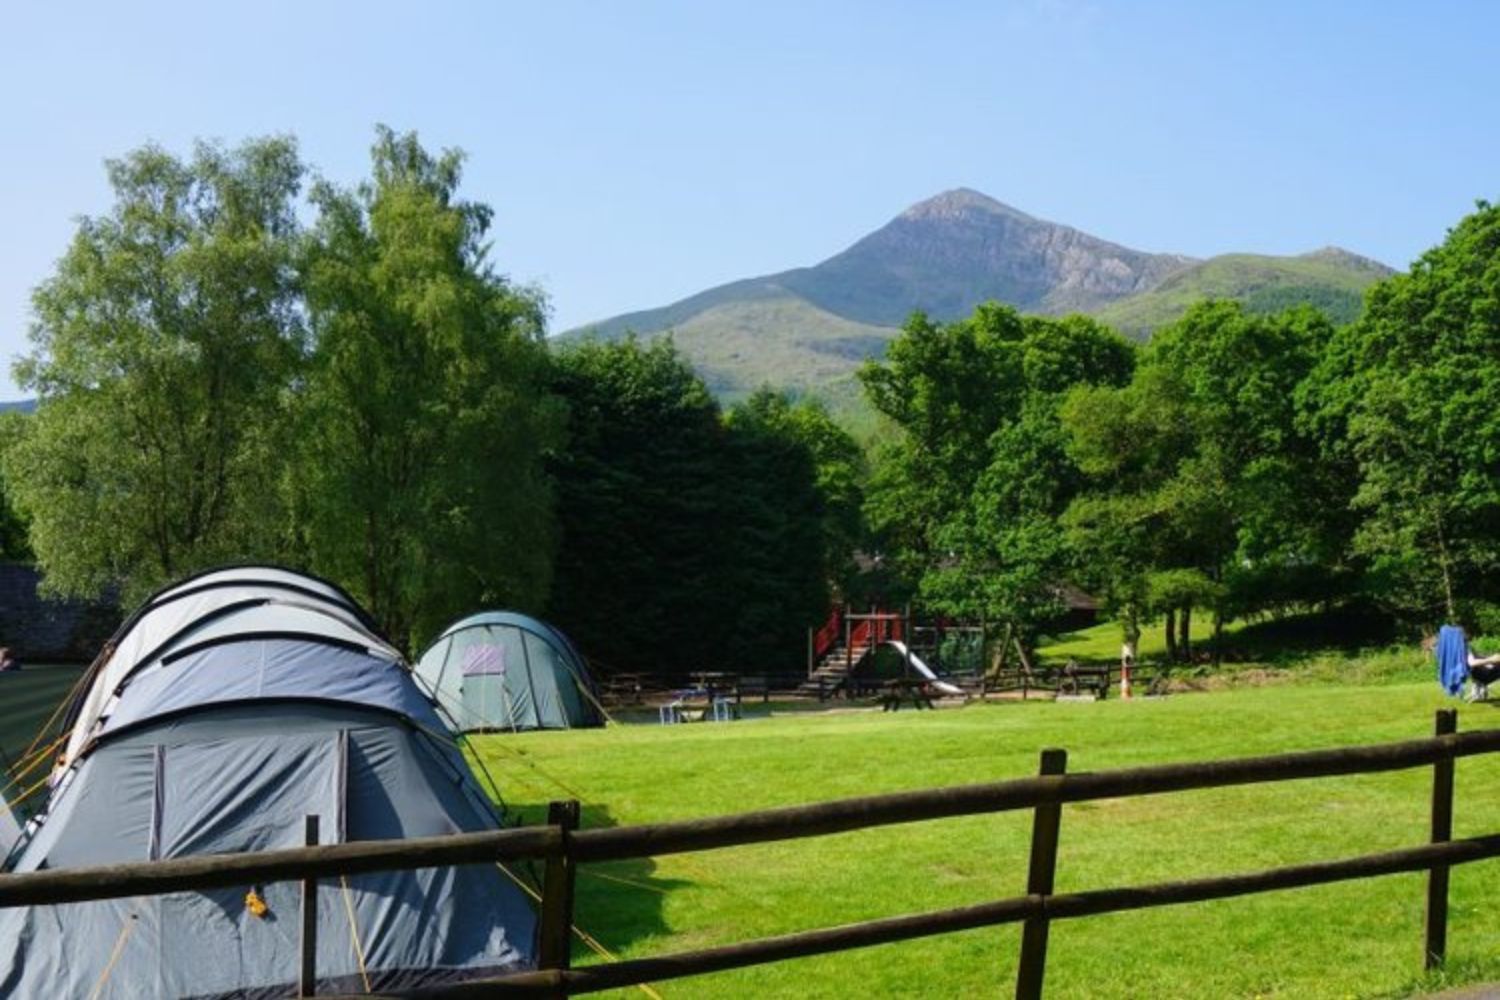 Tents pitched on next to park with mountain in background, Snowdonia